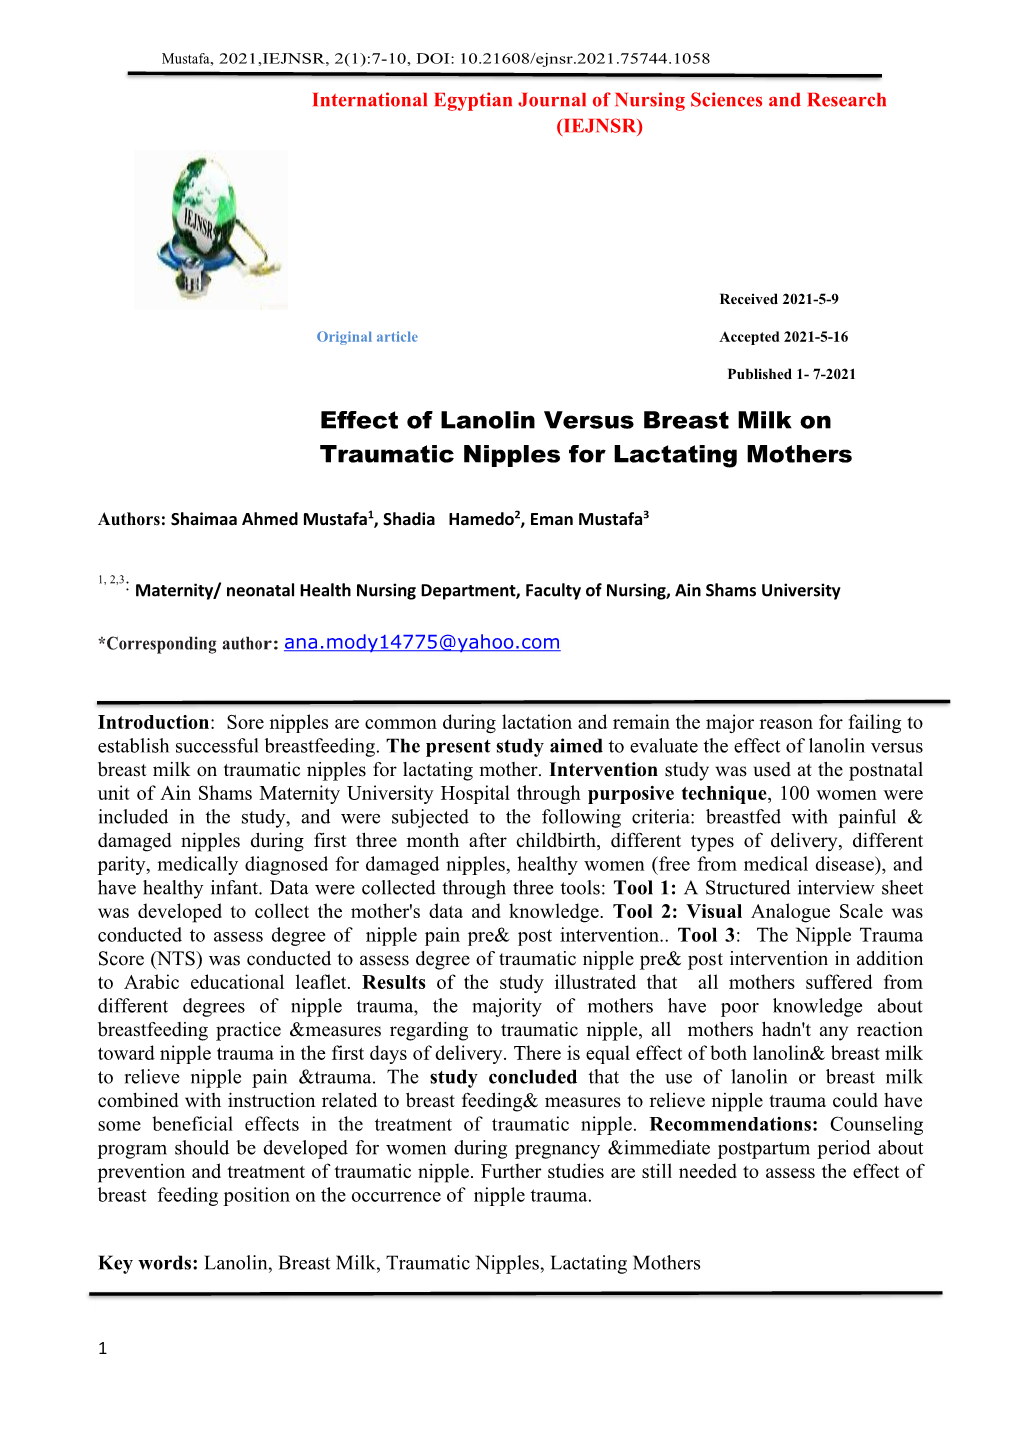 Effect of Lanolin Versus Breast Milk on Traumatic Nipples for Lactating Mothers